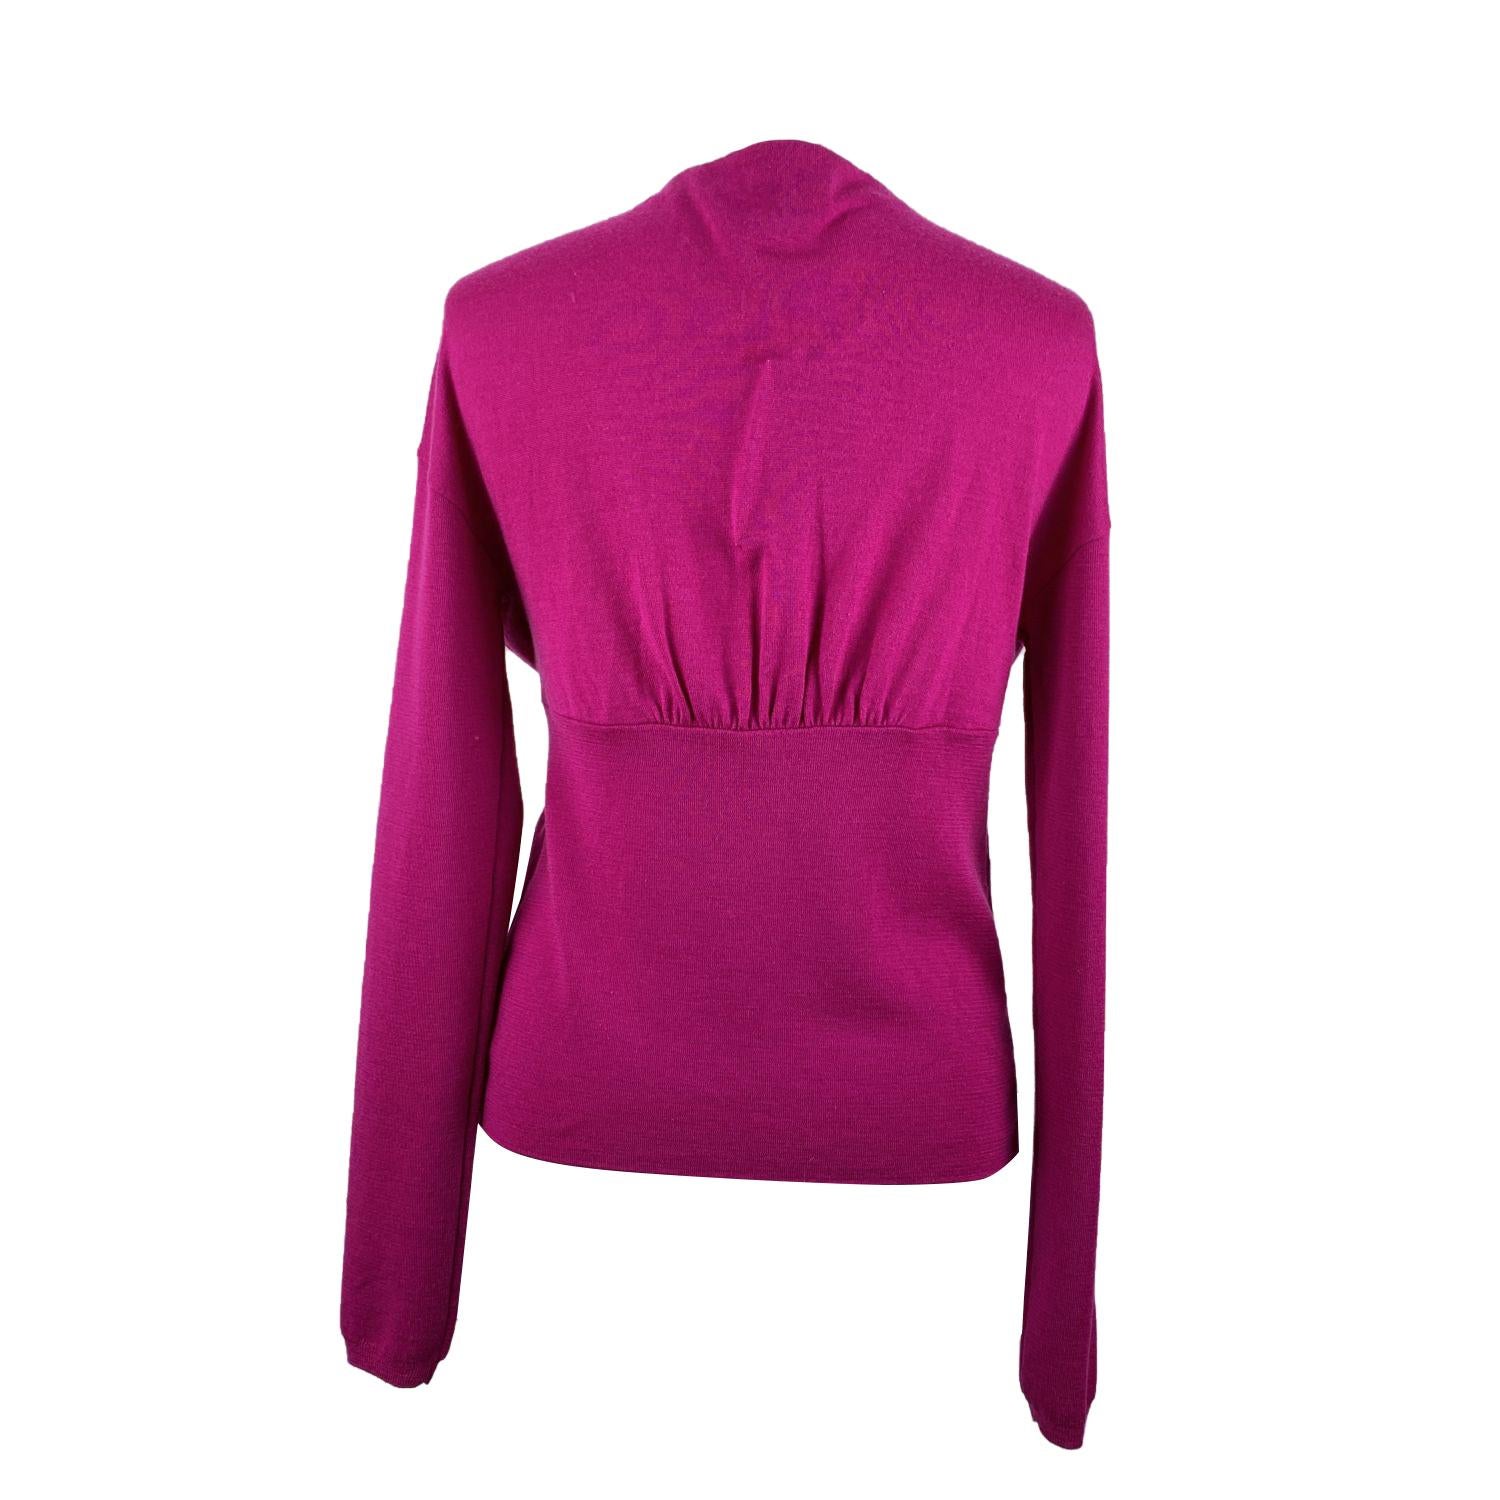 Valentino wool blend cardigan in magenta color. V - neckline, draping on the front and self-tie closure. Composition: 70% Wool Super 120 S, 20% Silk, 10% Cashmere. Size: M (The size shown for this item is the size indicated by the designer on the